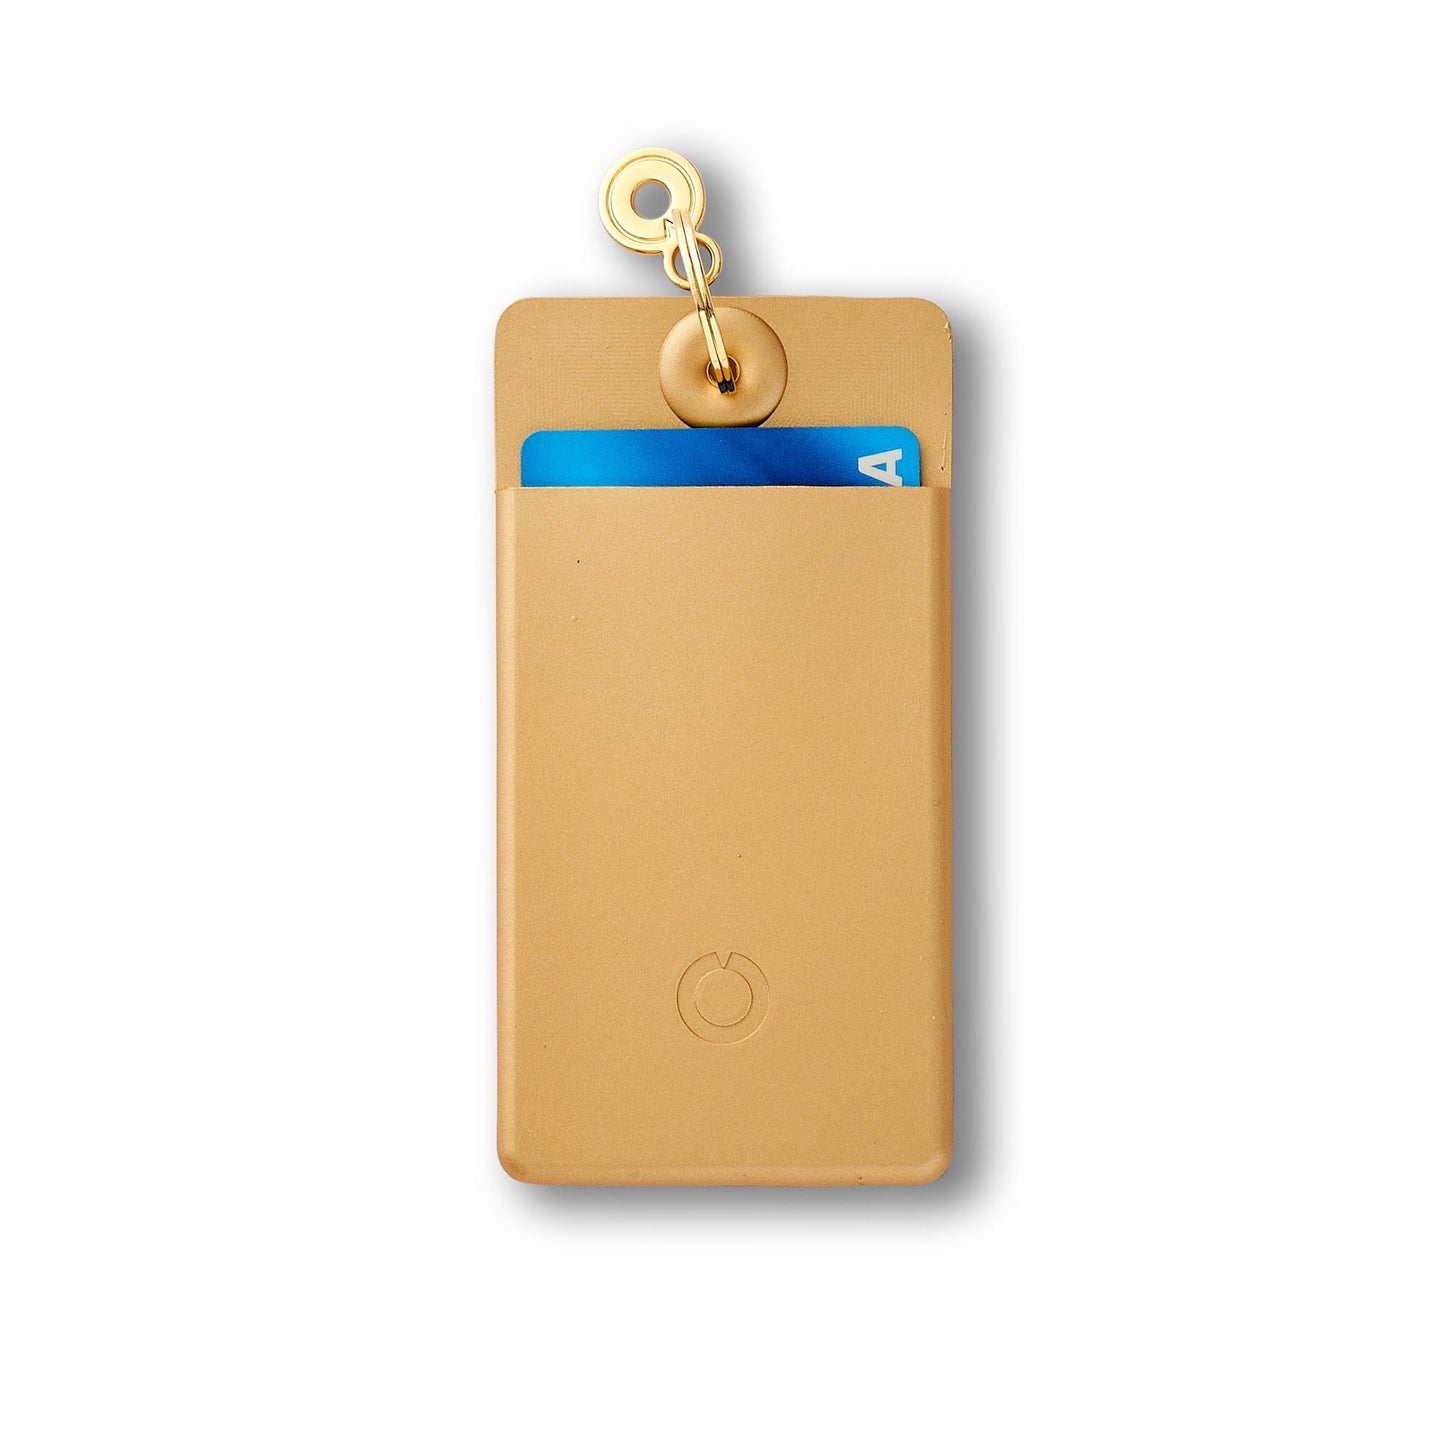 Solid Gold Rush - Silicone ID Case - Oventure. This shows the back side which has a very secure pocket for credit card and ids.